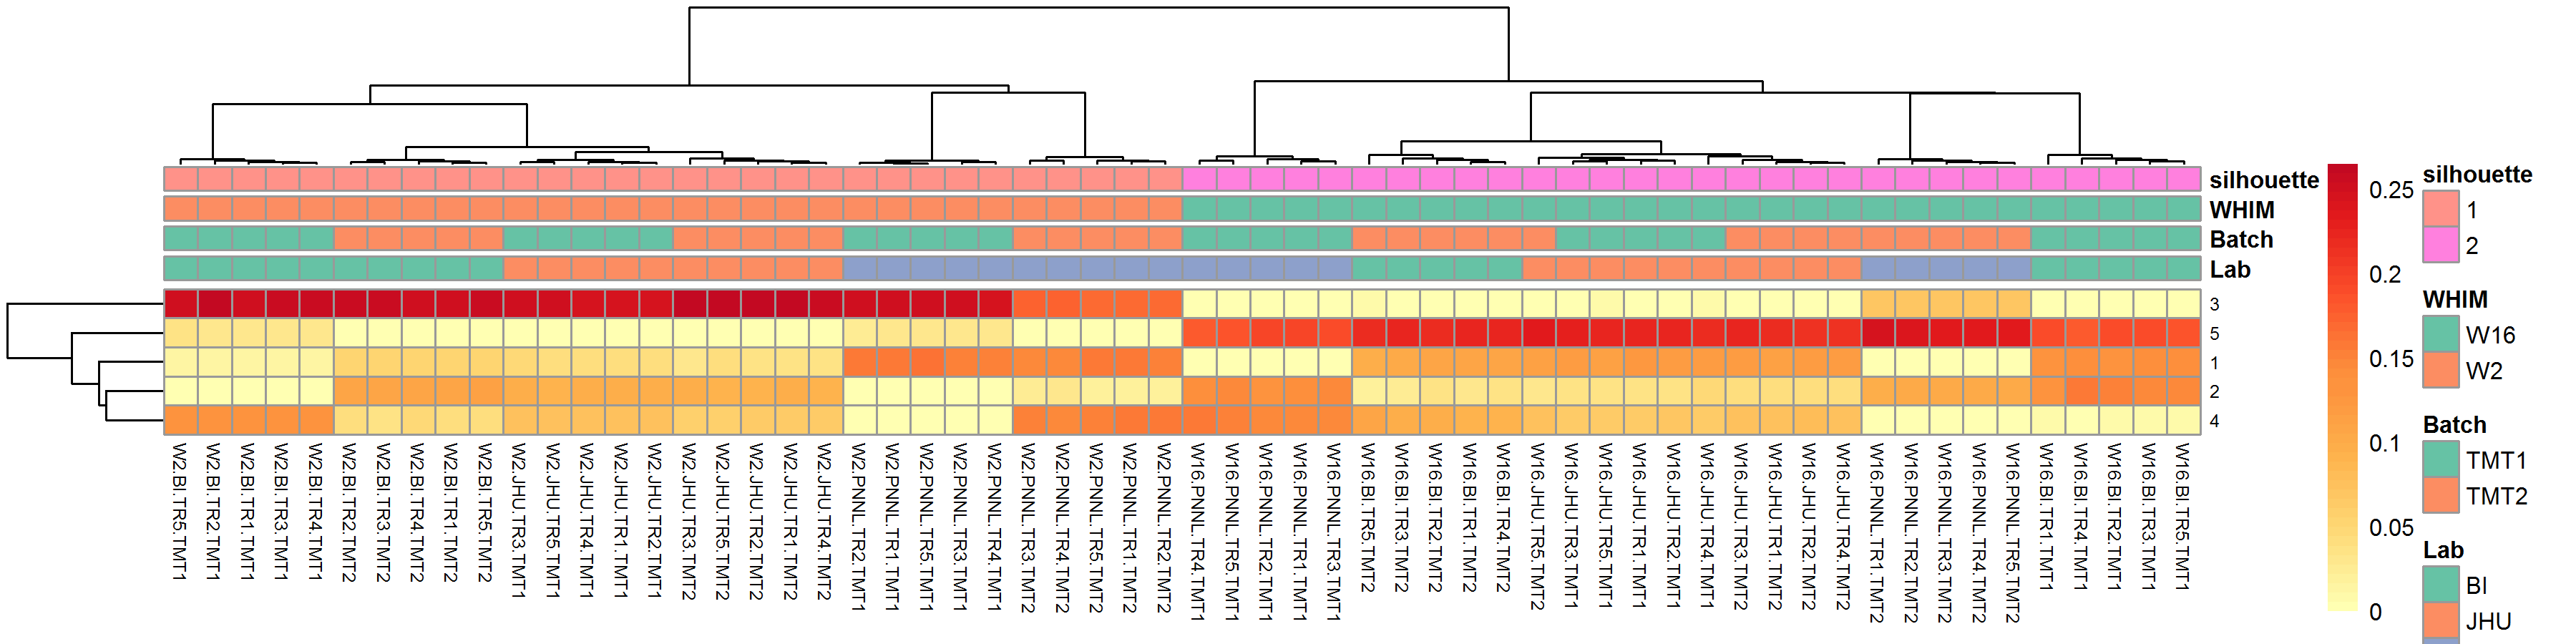 **Figure 10A-10B.** Heat map visualization of protein NMF results with default method  (results from method = "lee" not shown). Left: concensus; right: coefficients; metagenes not shown.